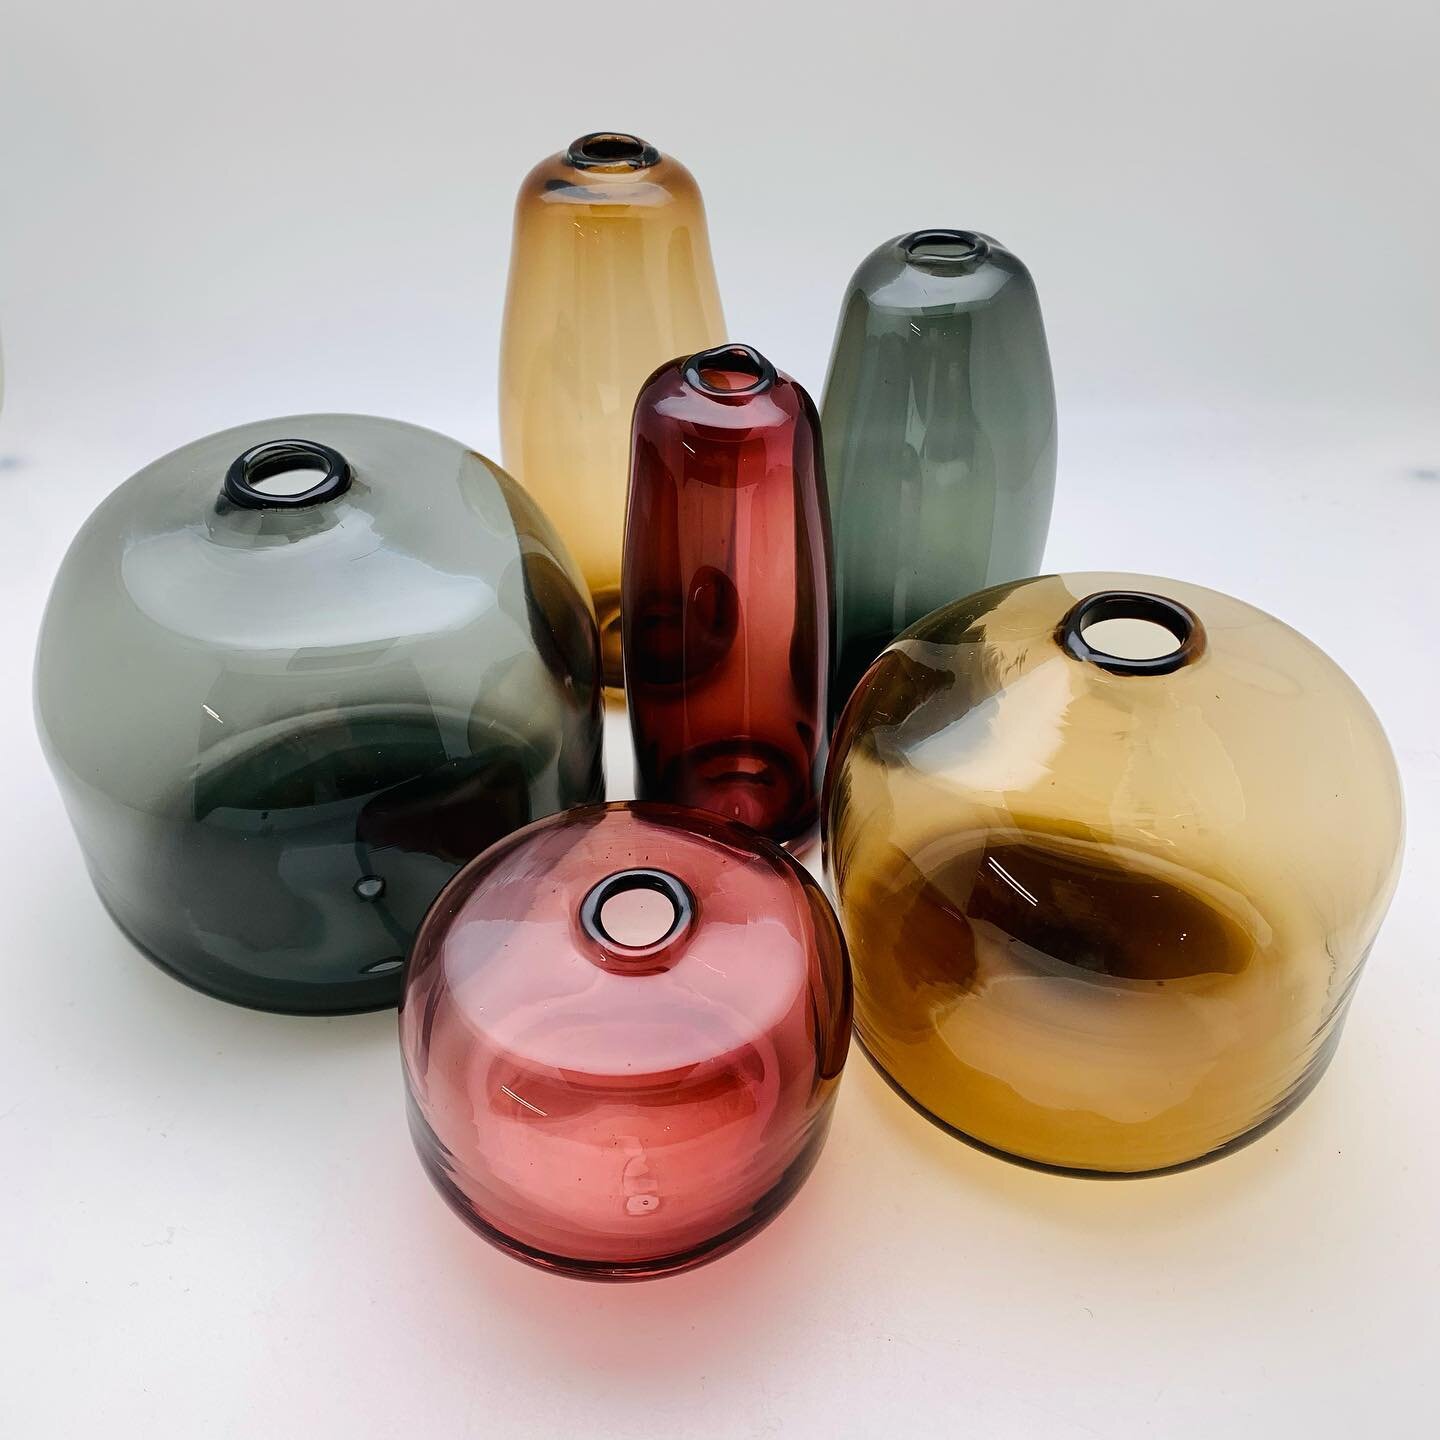 Blown glass gems sitting pretty! Just add your one or two of your favorite flower and brighten your day! #blownglass #decorativeobjects #makemehappy #sittingpretty #locallove #localgiftshop #studiocityshopping #giftguide